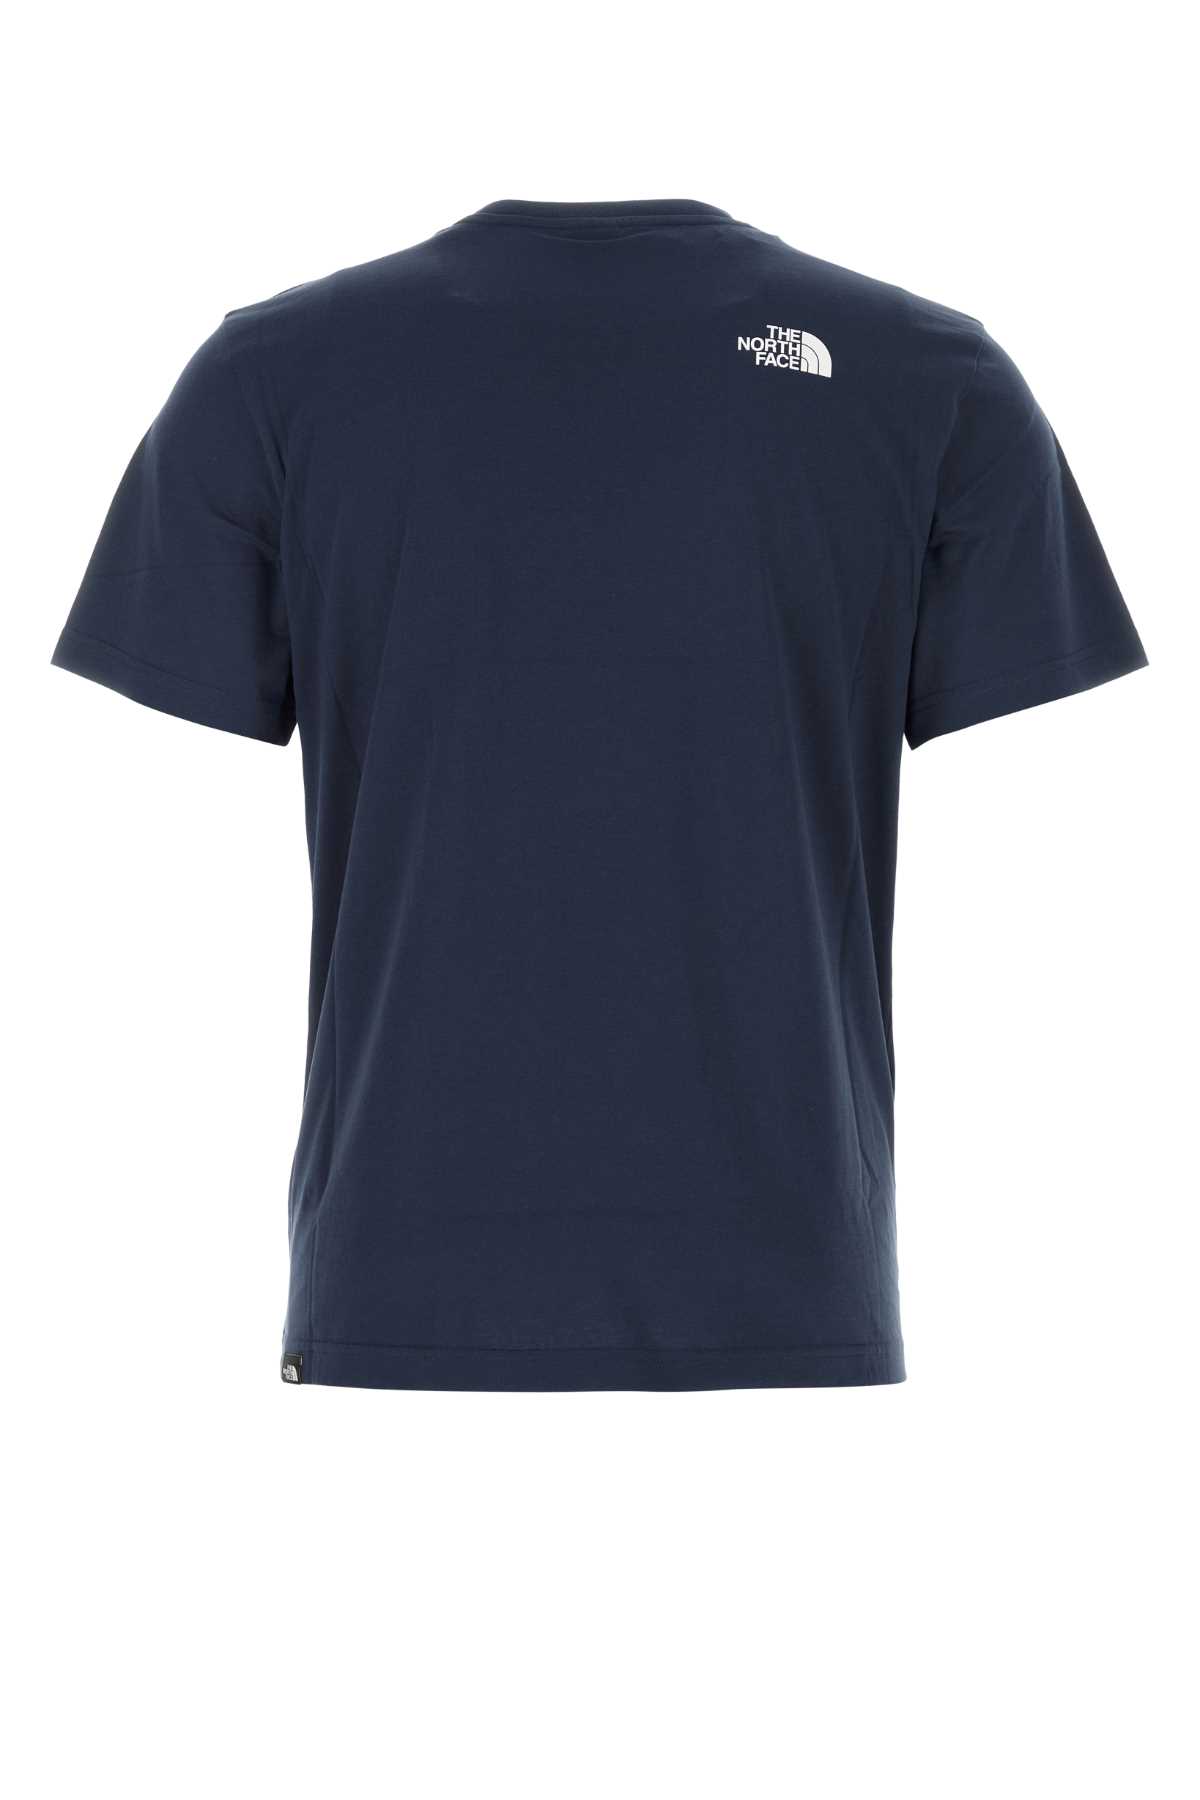 The North Face Navy Blue Cotton T-shirt In Summitnavy